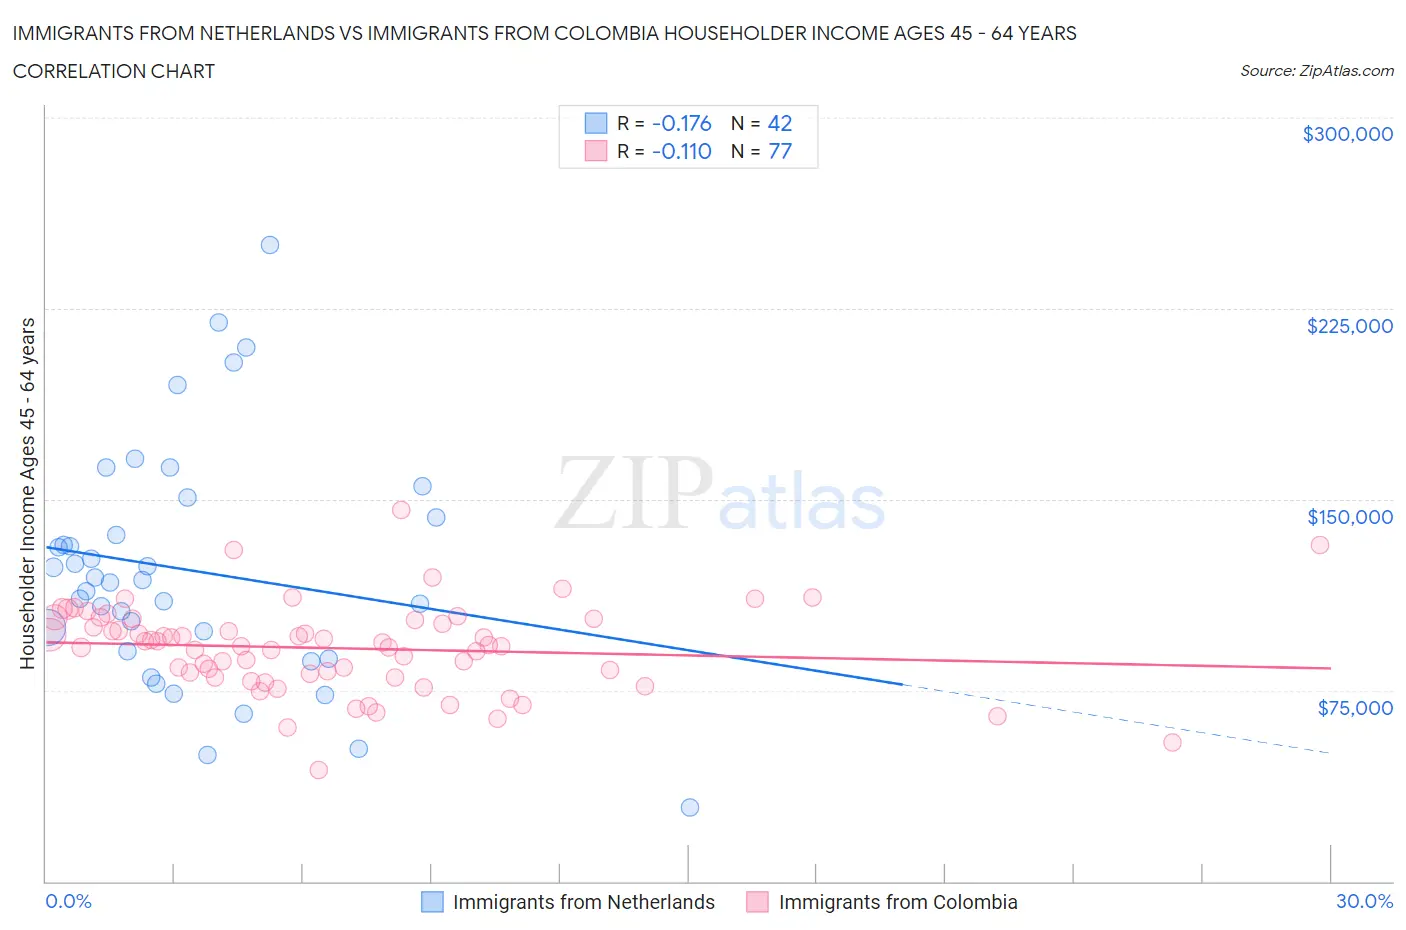 Immigrants from Netherlands vs Immigrants from Colombia Householder Income Ages 45 - 64 years